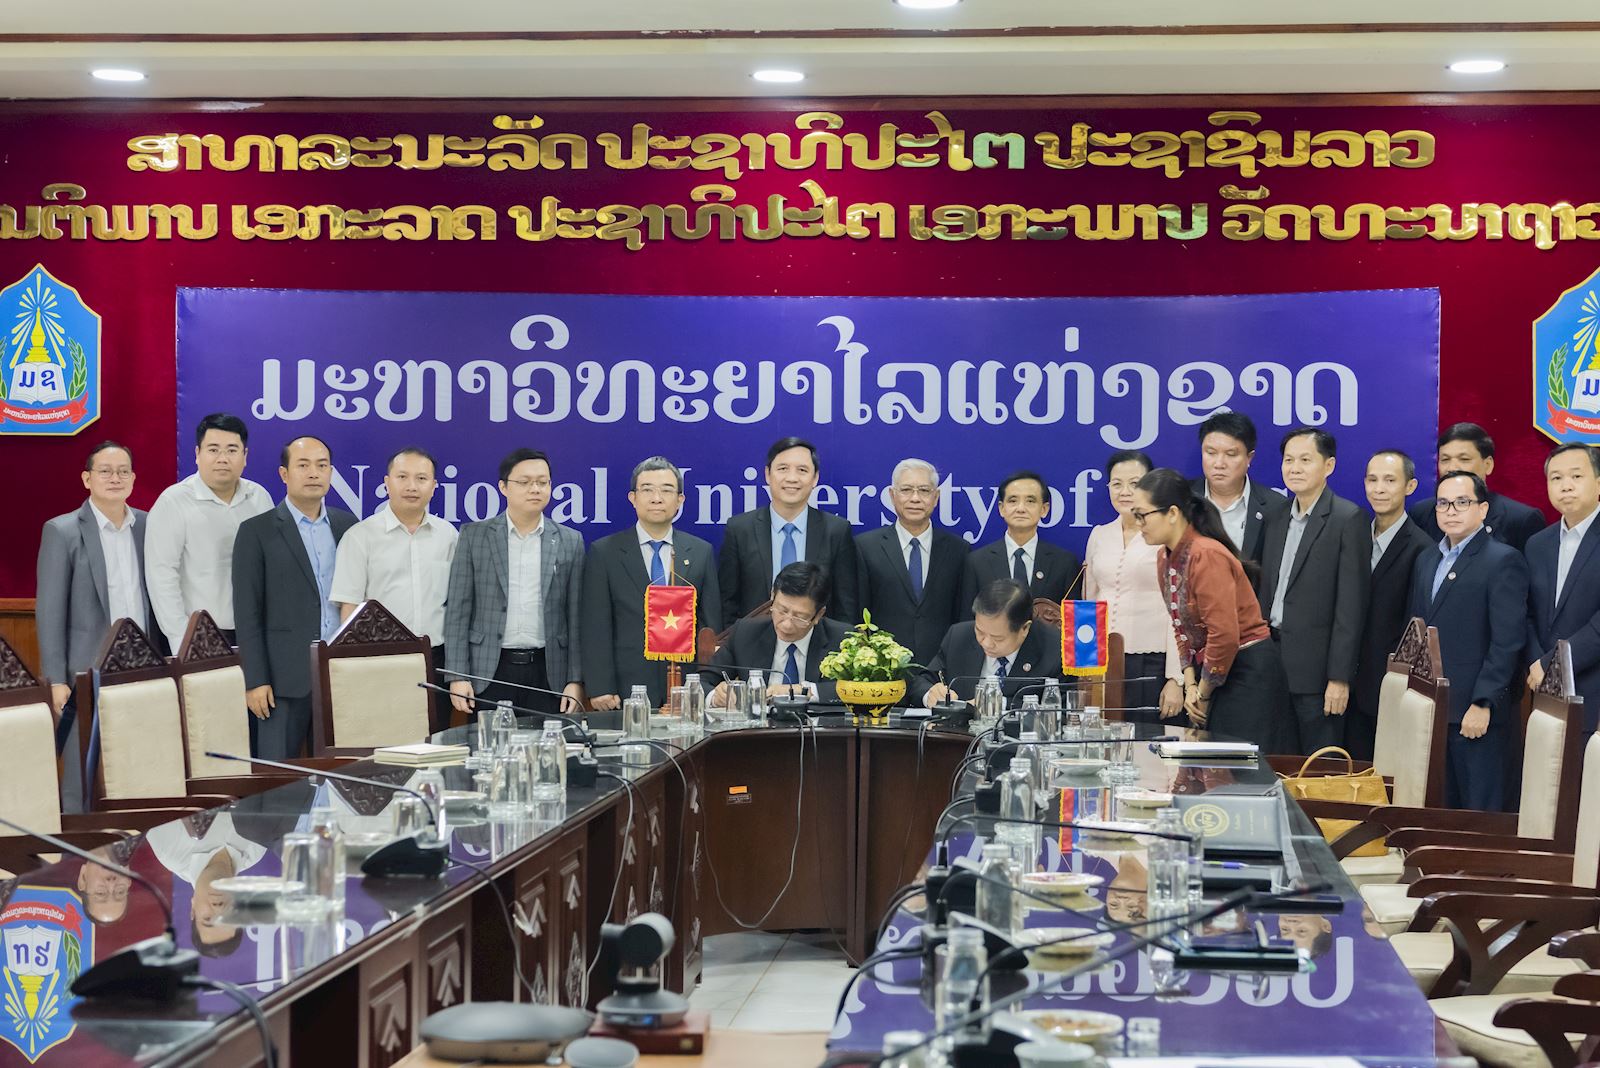 THE DELEGATION OF HANOI UNIVERSITY OF CIVIL ENGINEERING TO VISIT AND WORK IN LAO PDR